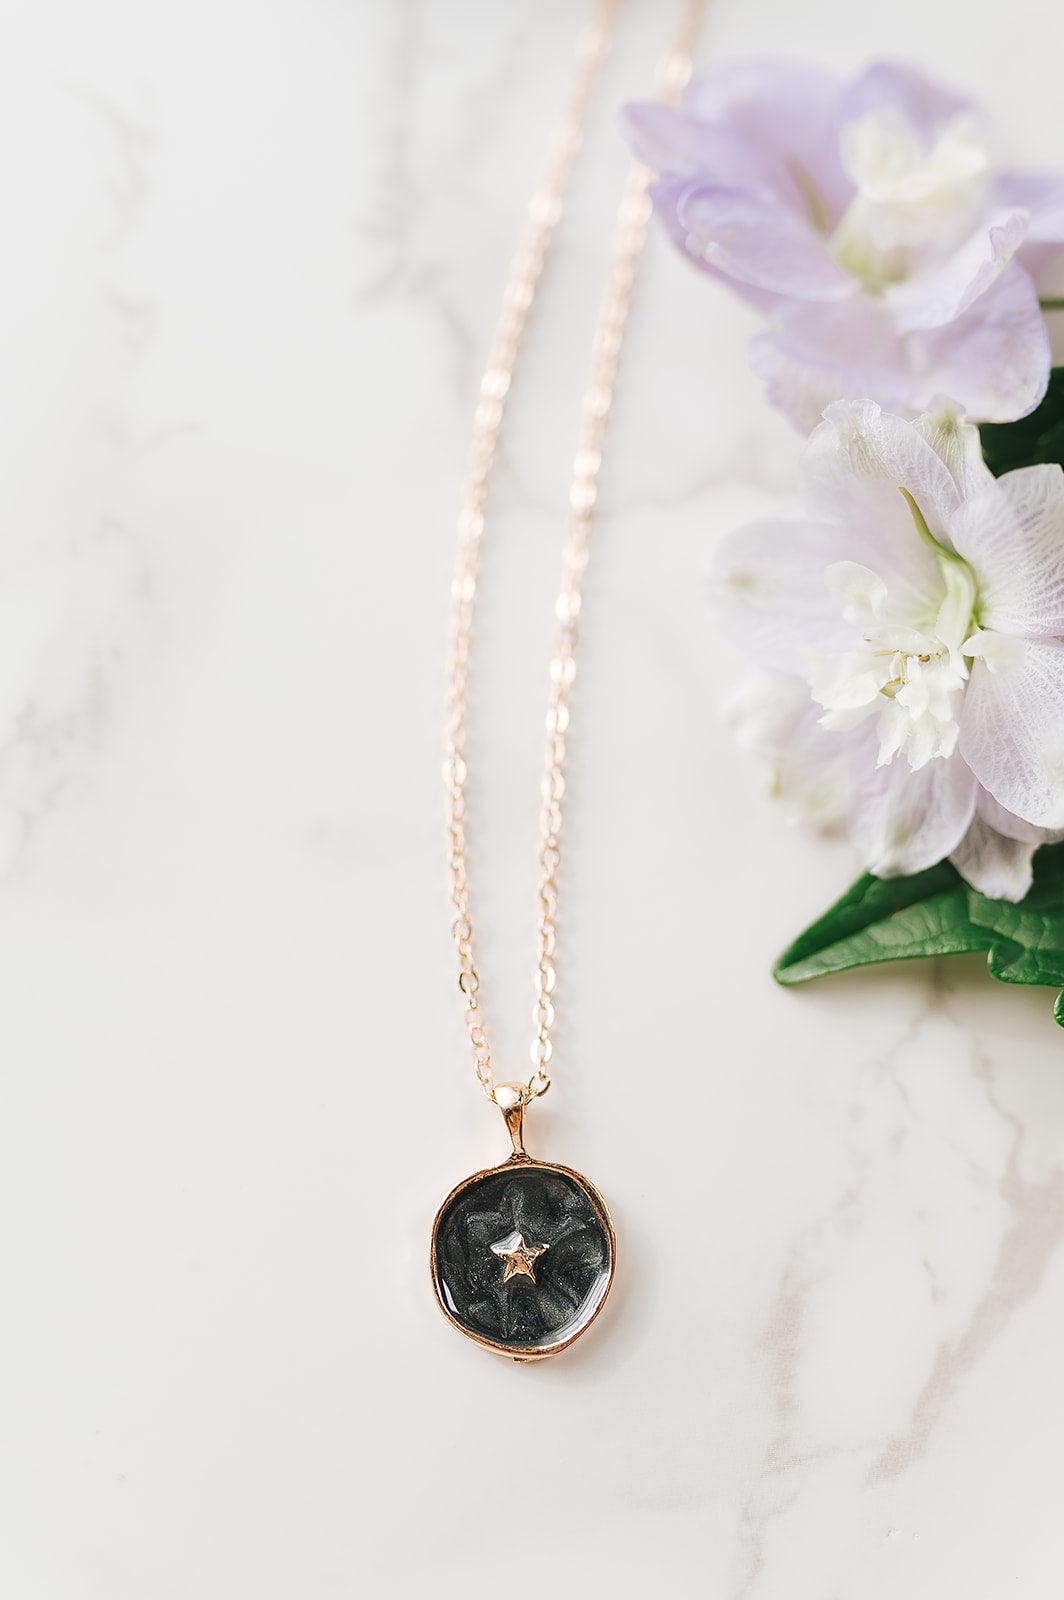 Navy Circle Gold Star Necklace - Mkay Style